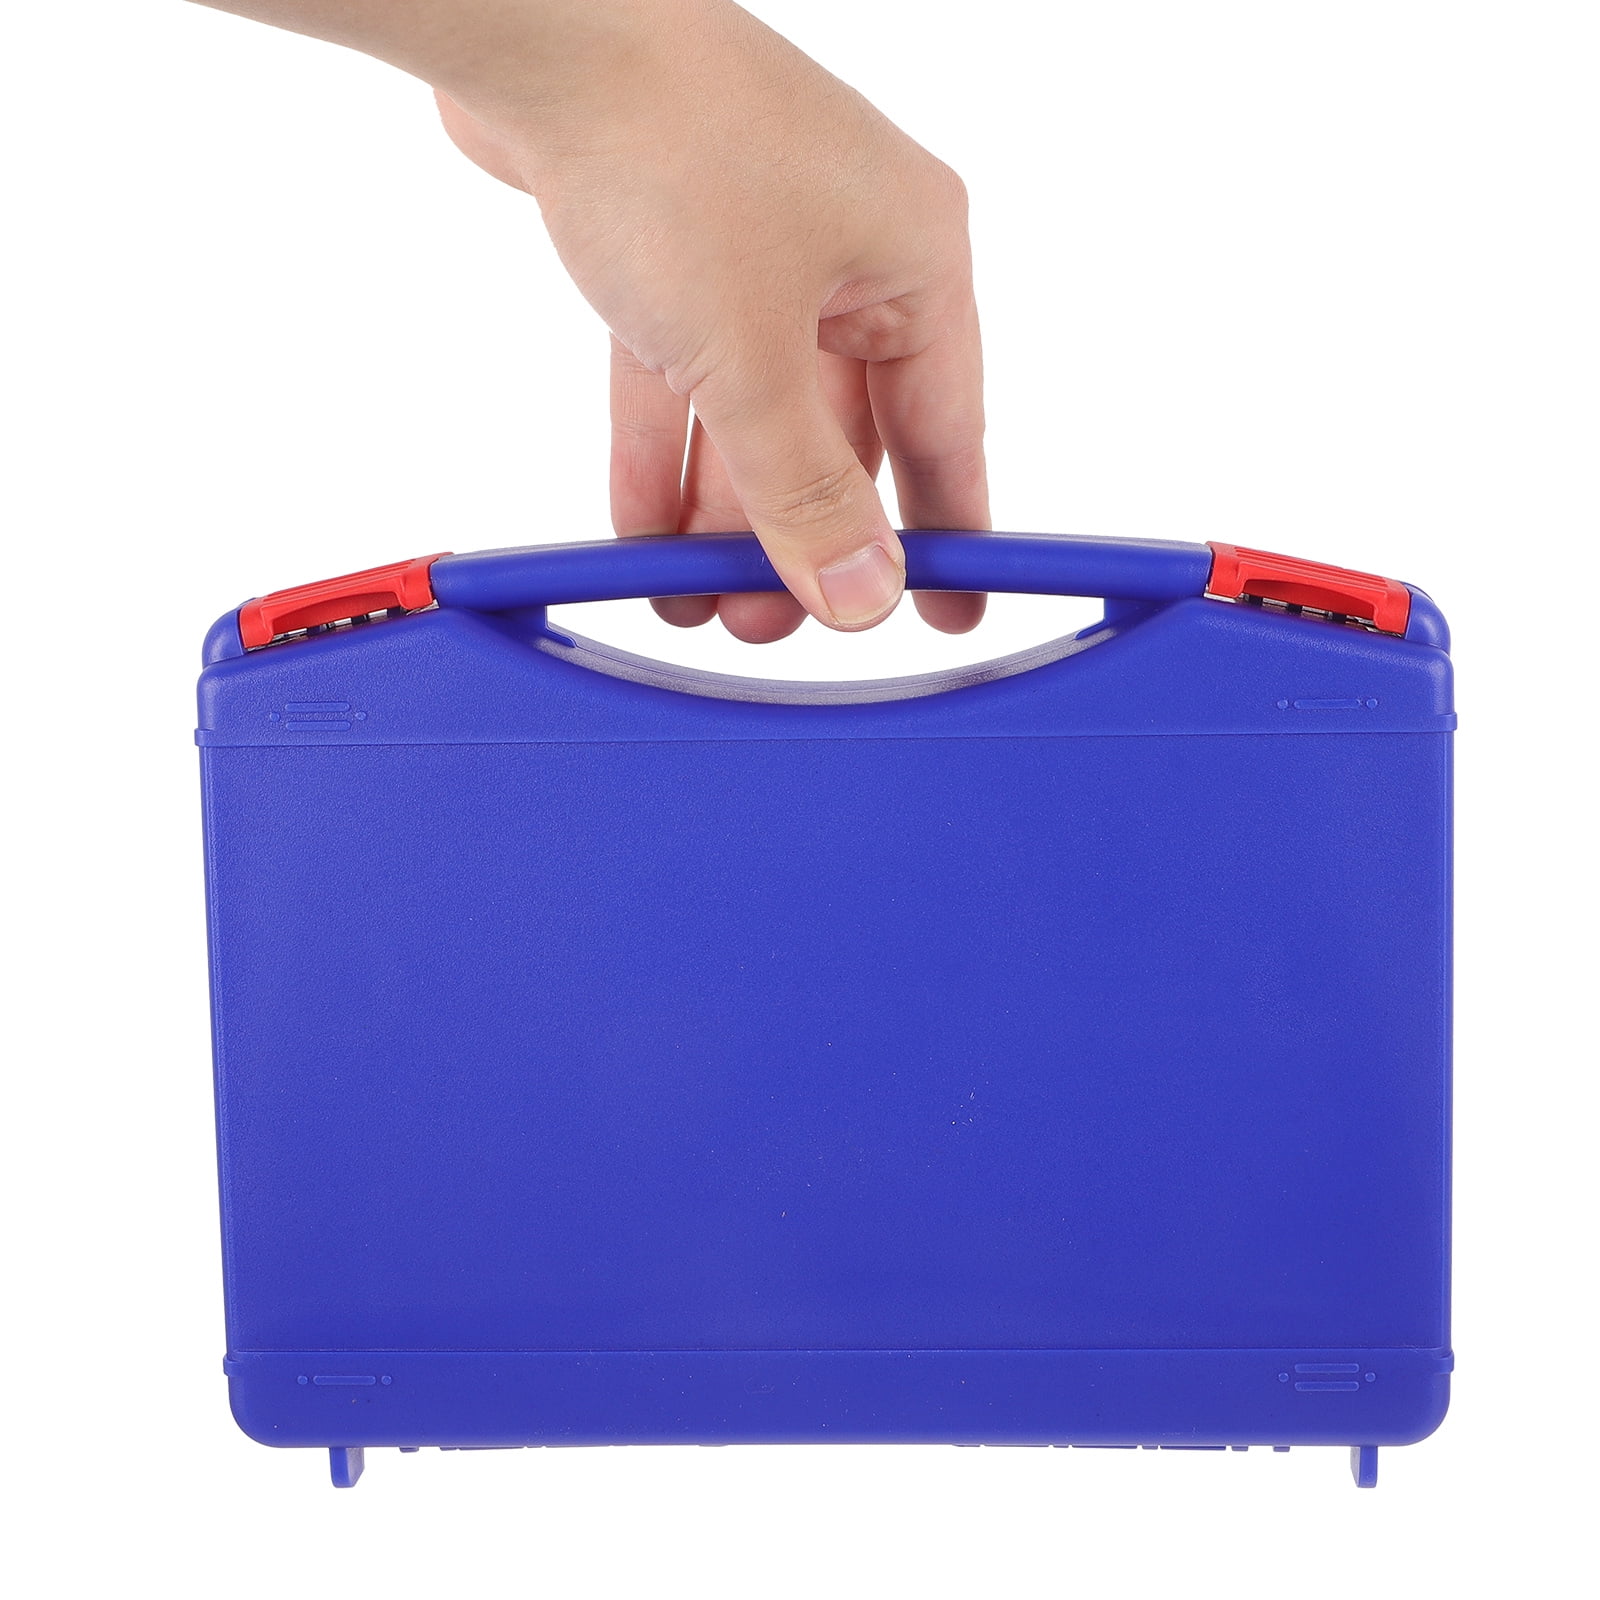 Plastic Containers Mechanic Tools Storage Box Portable Case Makeup Organizer  Small Hard with Foam Handheld Travel 